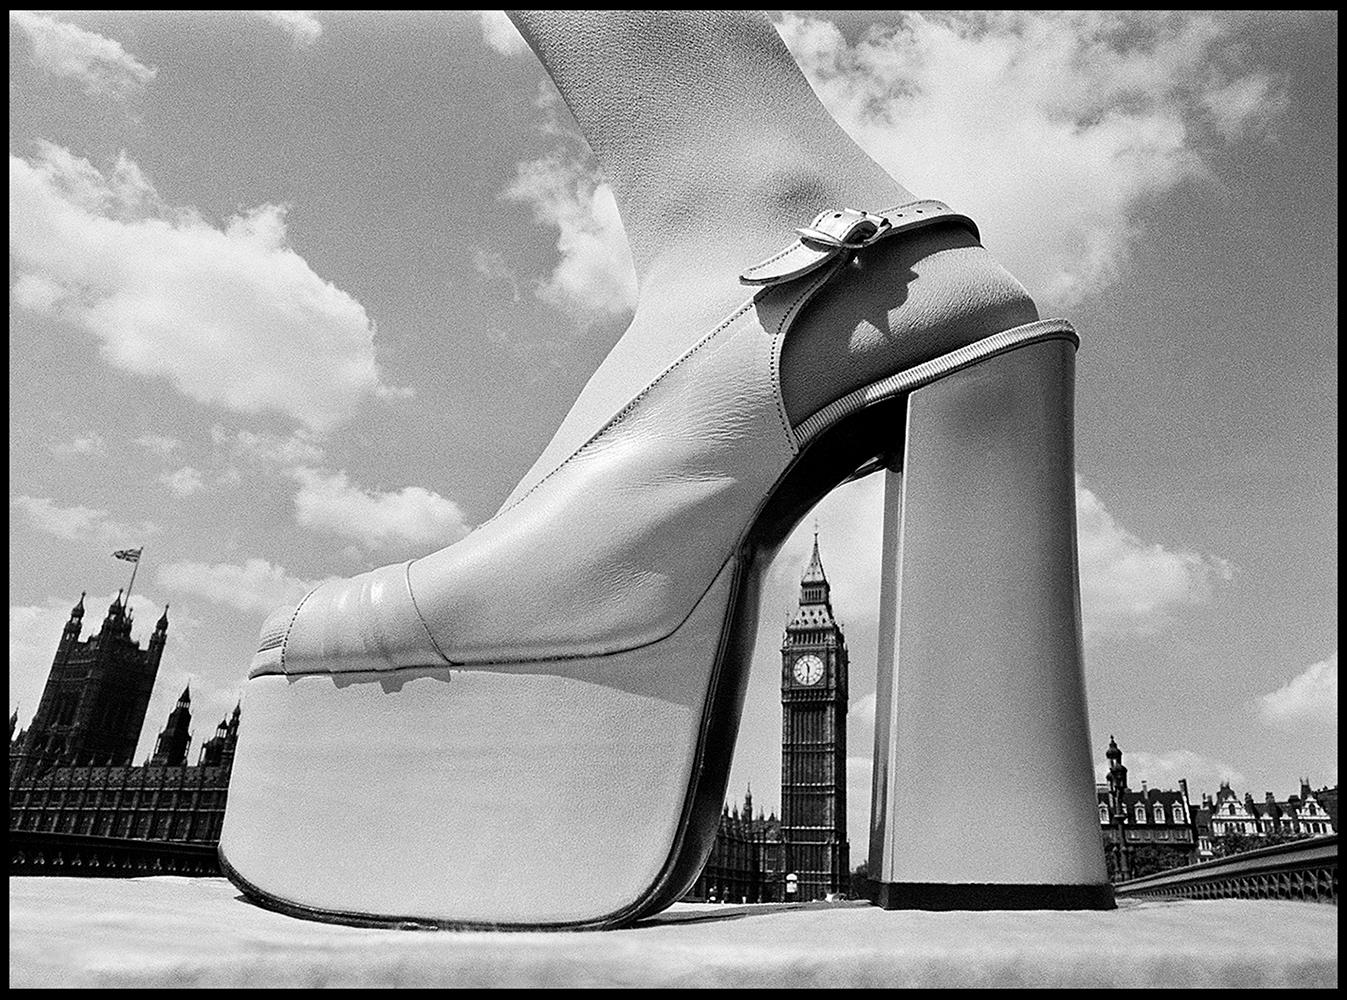 Well Heeled

By Arthur Steel 

Paper size: 64 x 48.5" / 162.5 x 123 cm

Silver Gelatin Print
1970 (printed later)
unframed
hand signed
limited edition of 10

note other print sizes and framing options are available, please enquire for